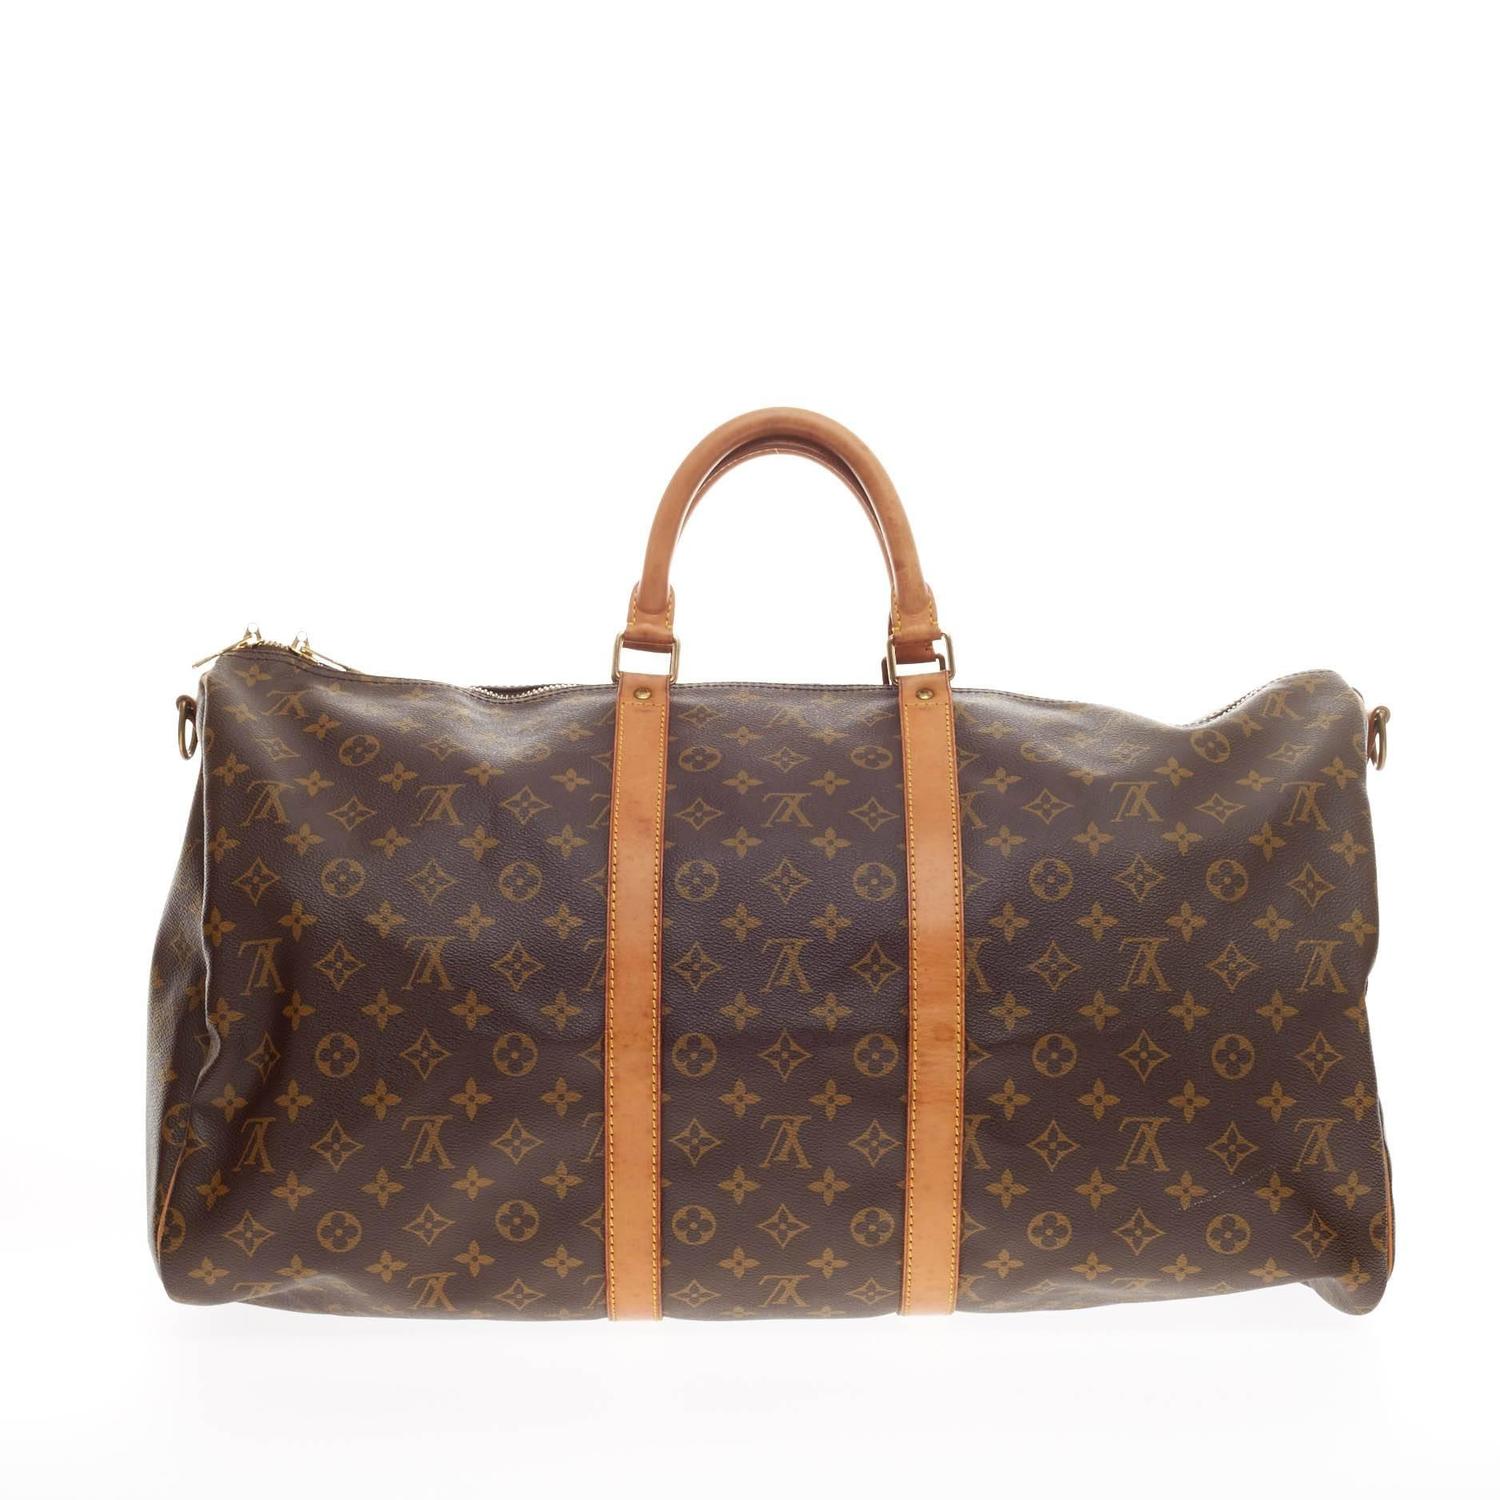 Louis Vuitton Keepall Bandouliere Monogram Canvas 55 at 1stdibs